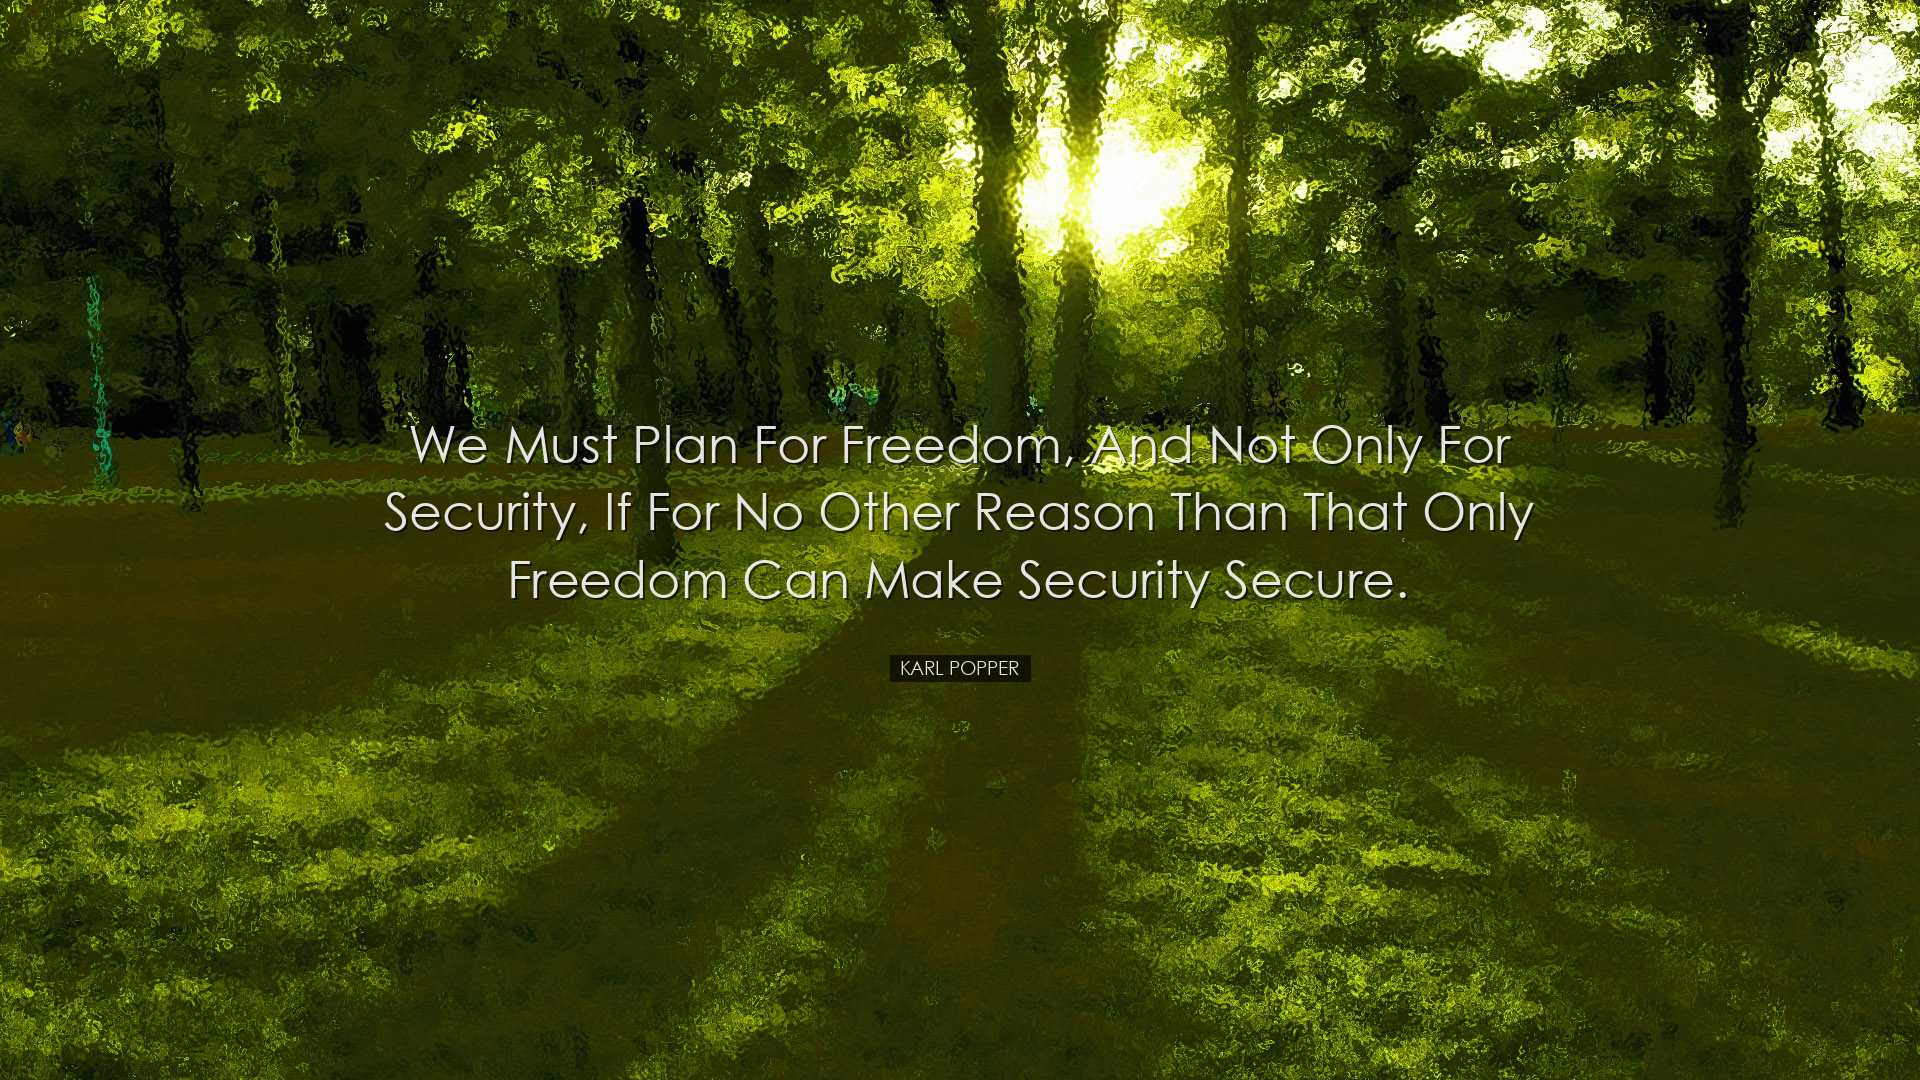 We must plan for freedom, and not only for security, if for no oth